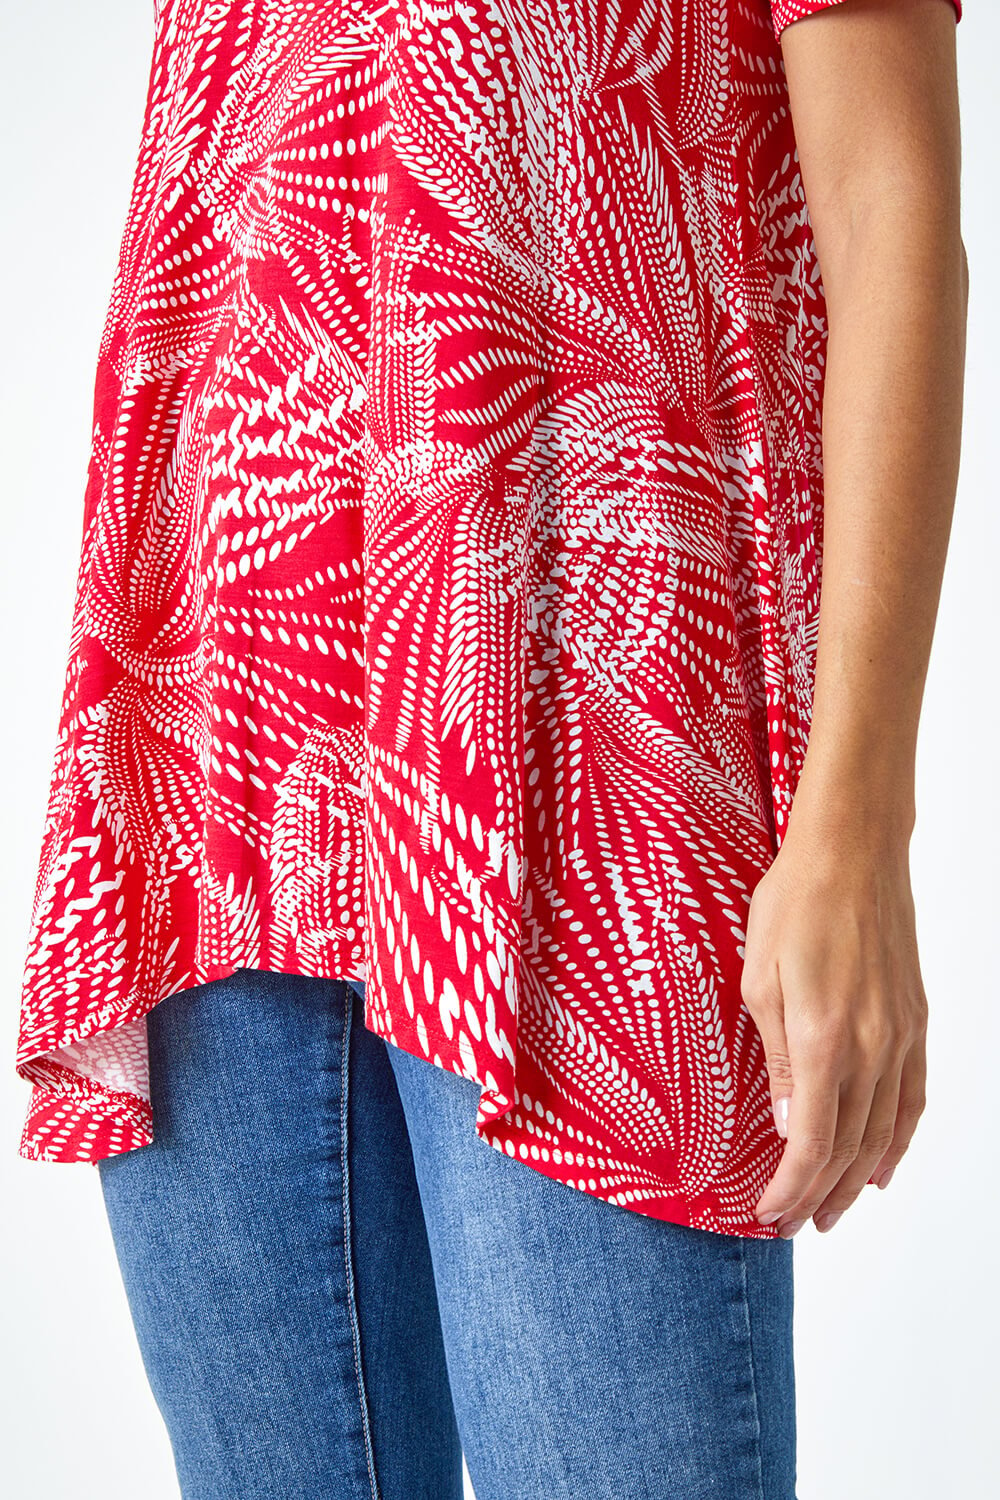 Red Textured Fan Print Stretch Hanky Hem Top, Image 5 of 5